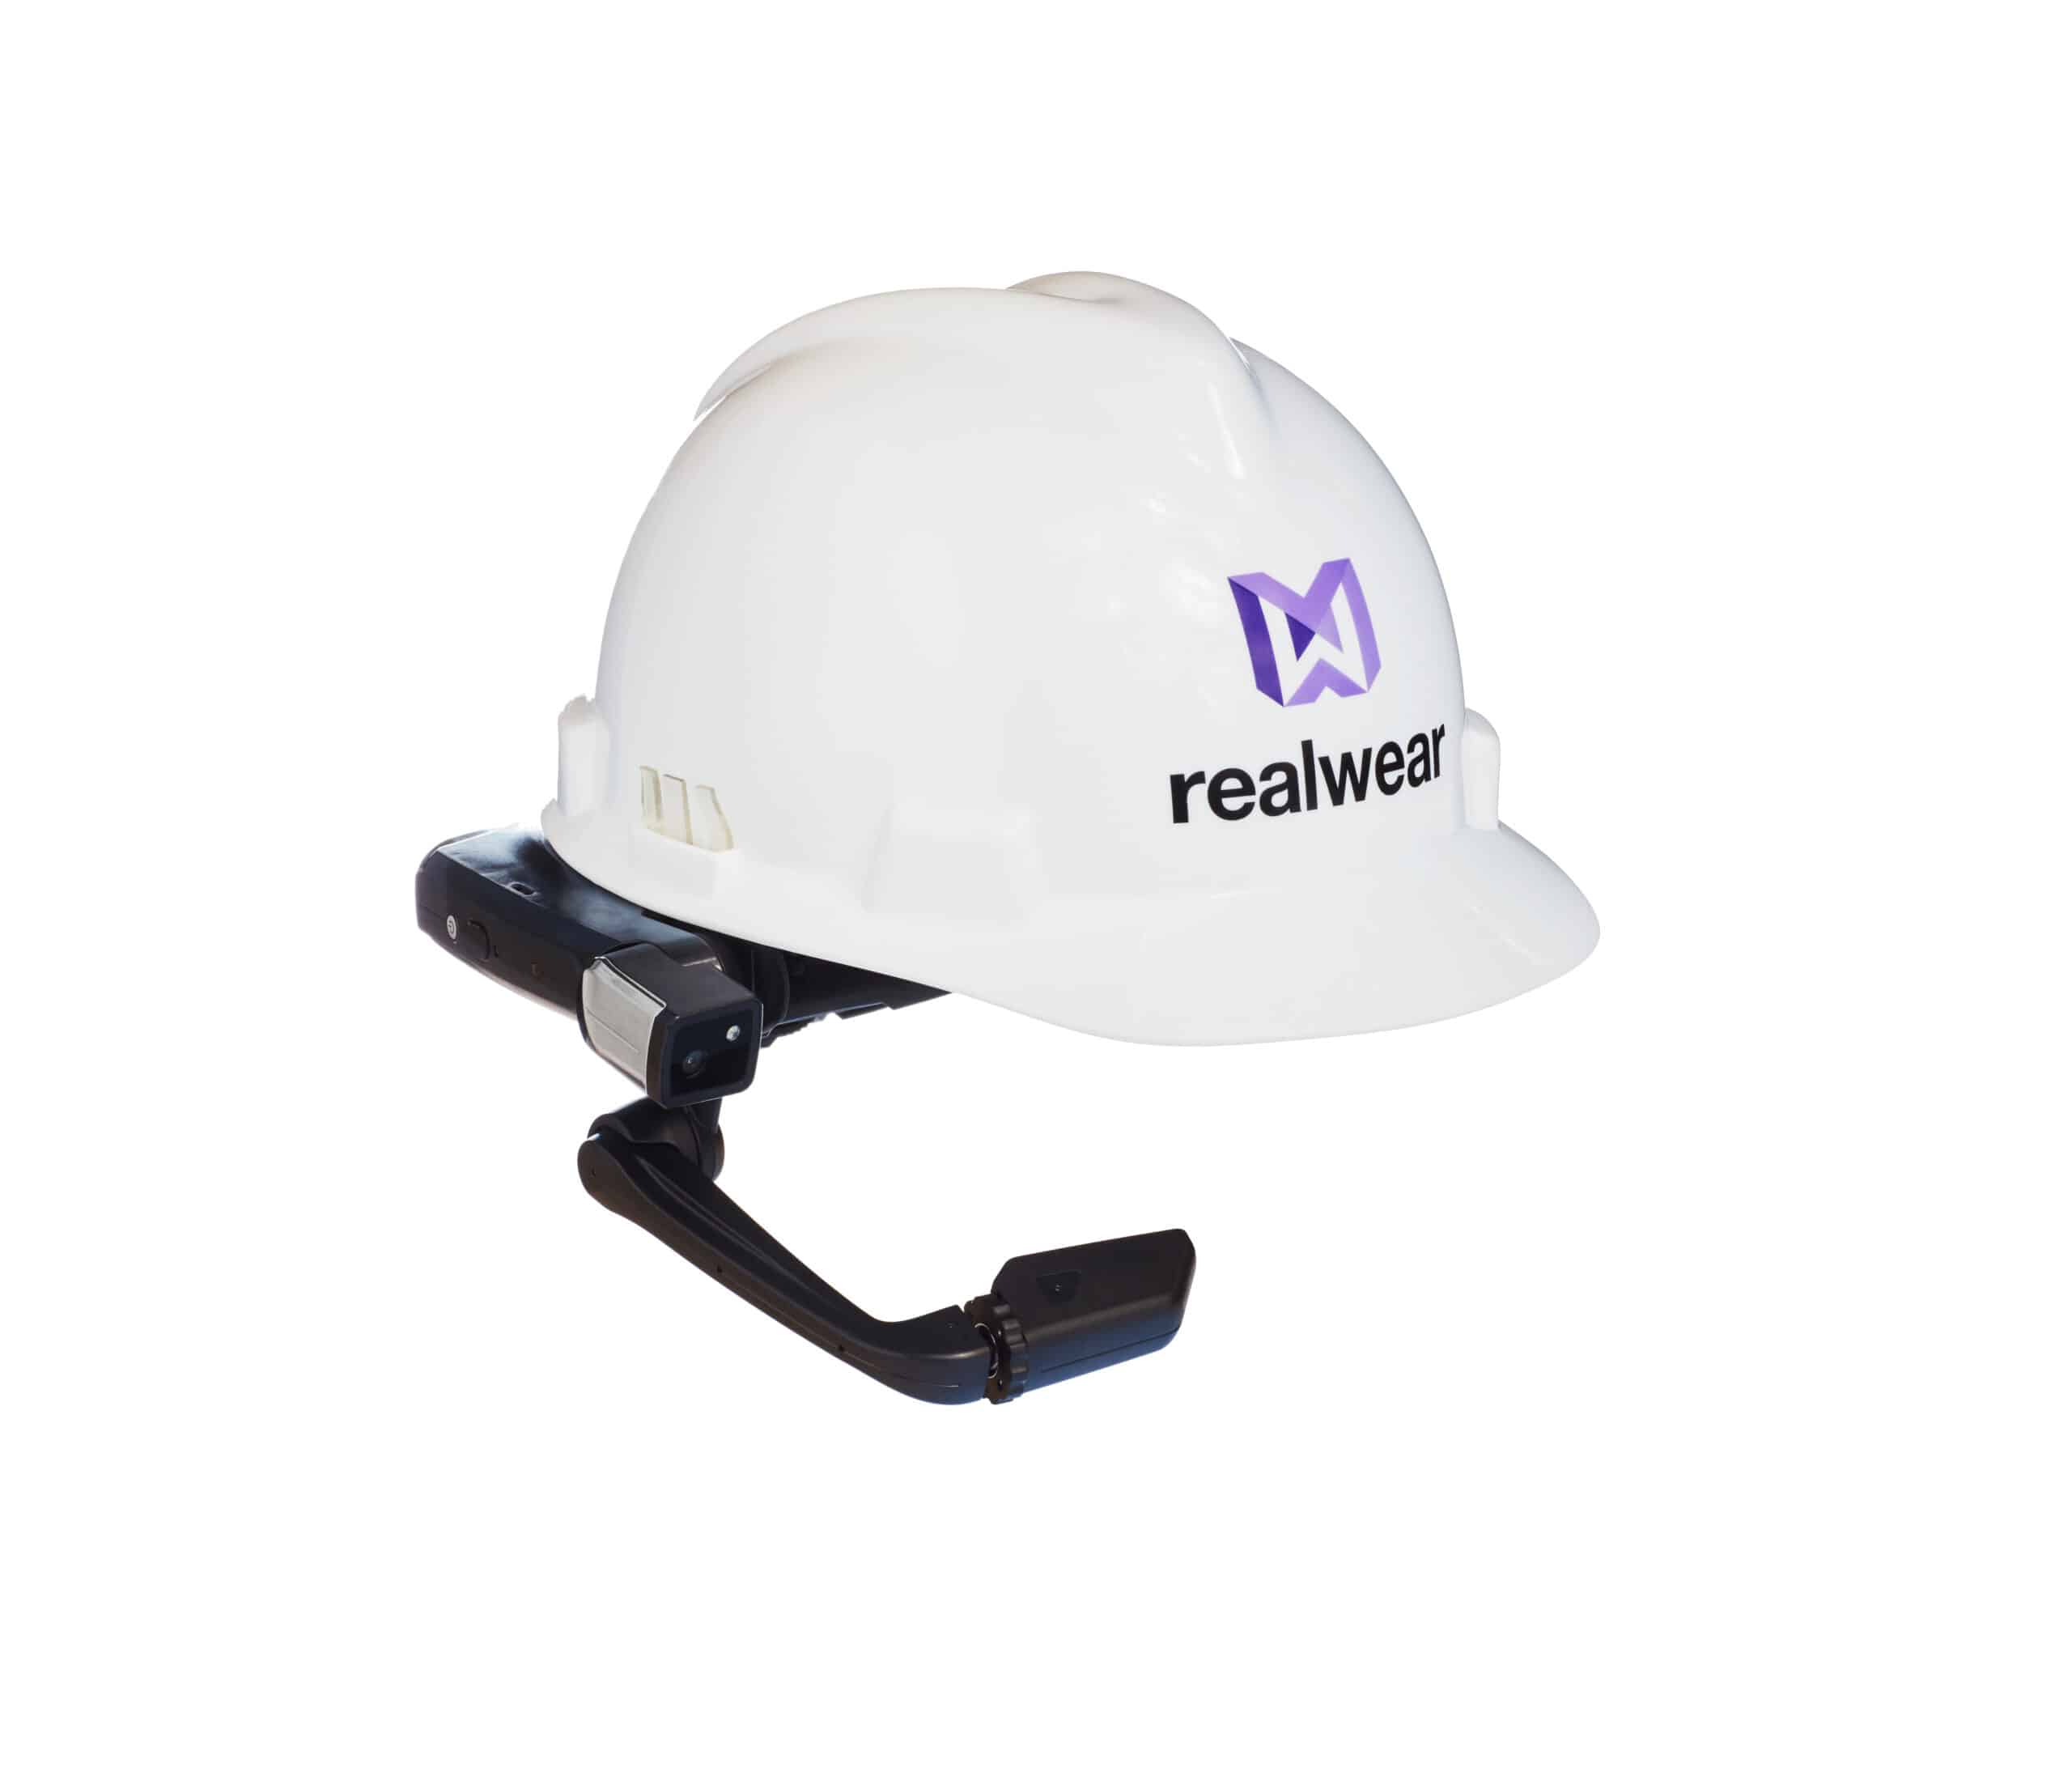 RealWear HMT-1 with helmet clipped photo